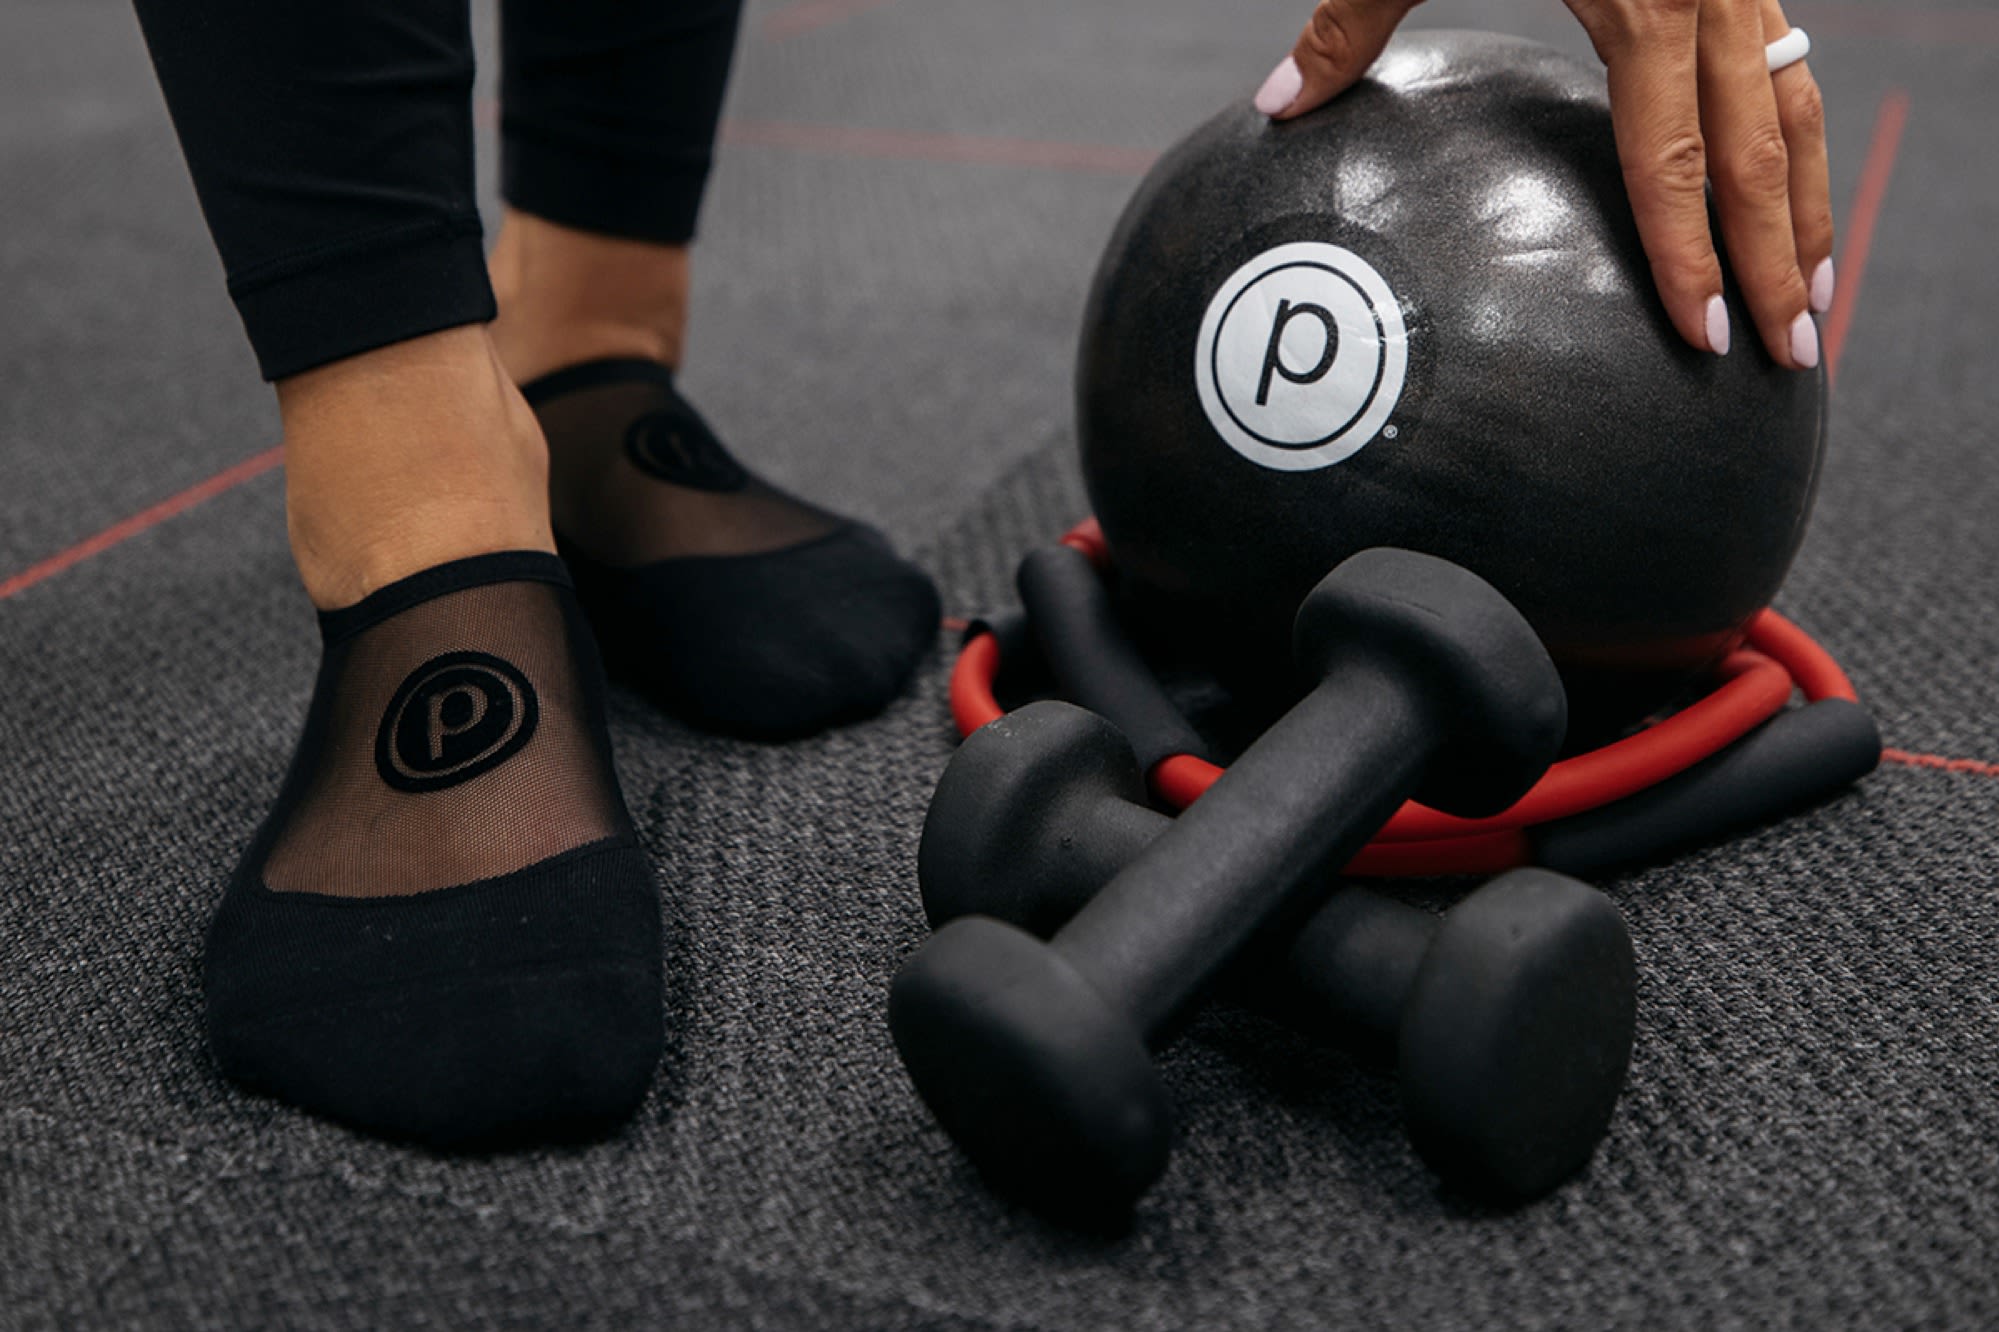 Pure Barre - Yaletown: Read Reviews and Book Classes on ClassPass